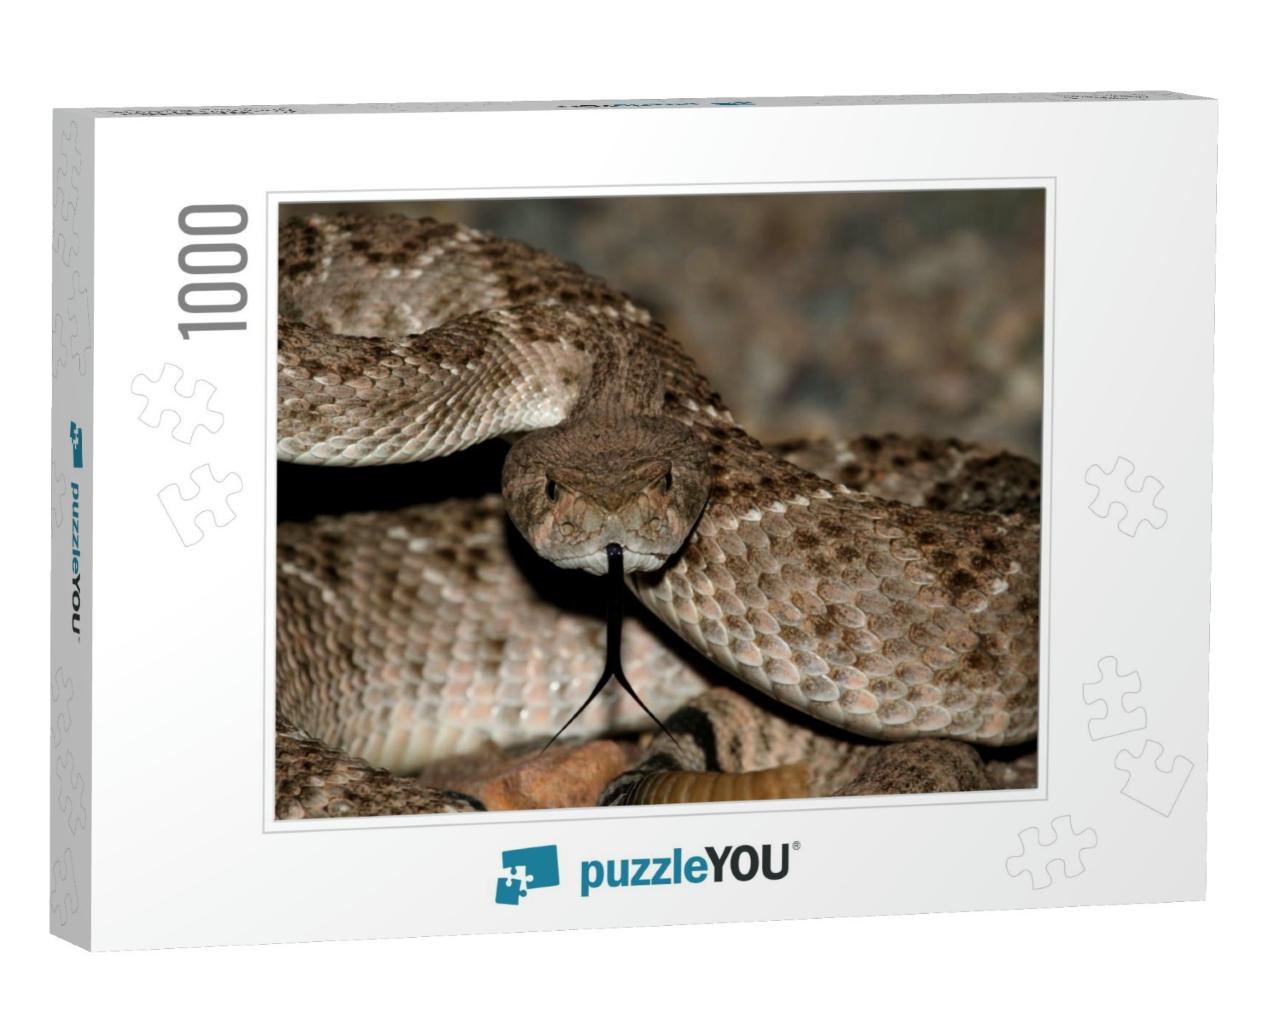 Mojave Rattlesnake Crotalus Scutulatus Coiled to Strike... Jigsaw Puzzle with 1000 pieces